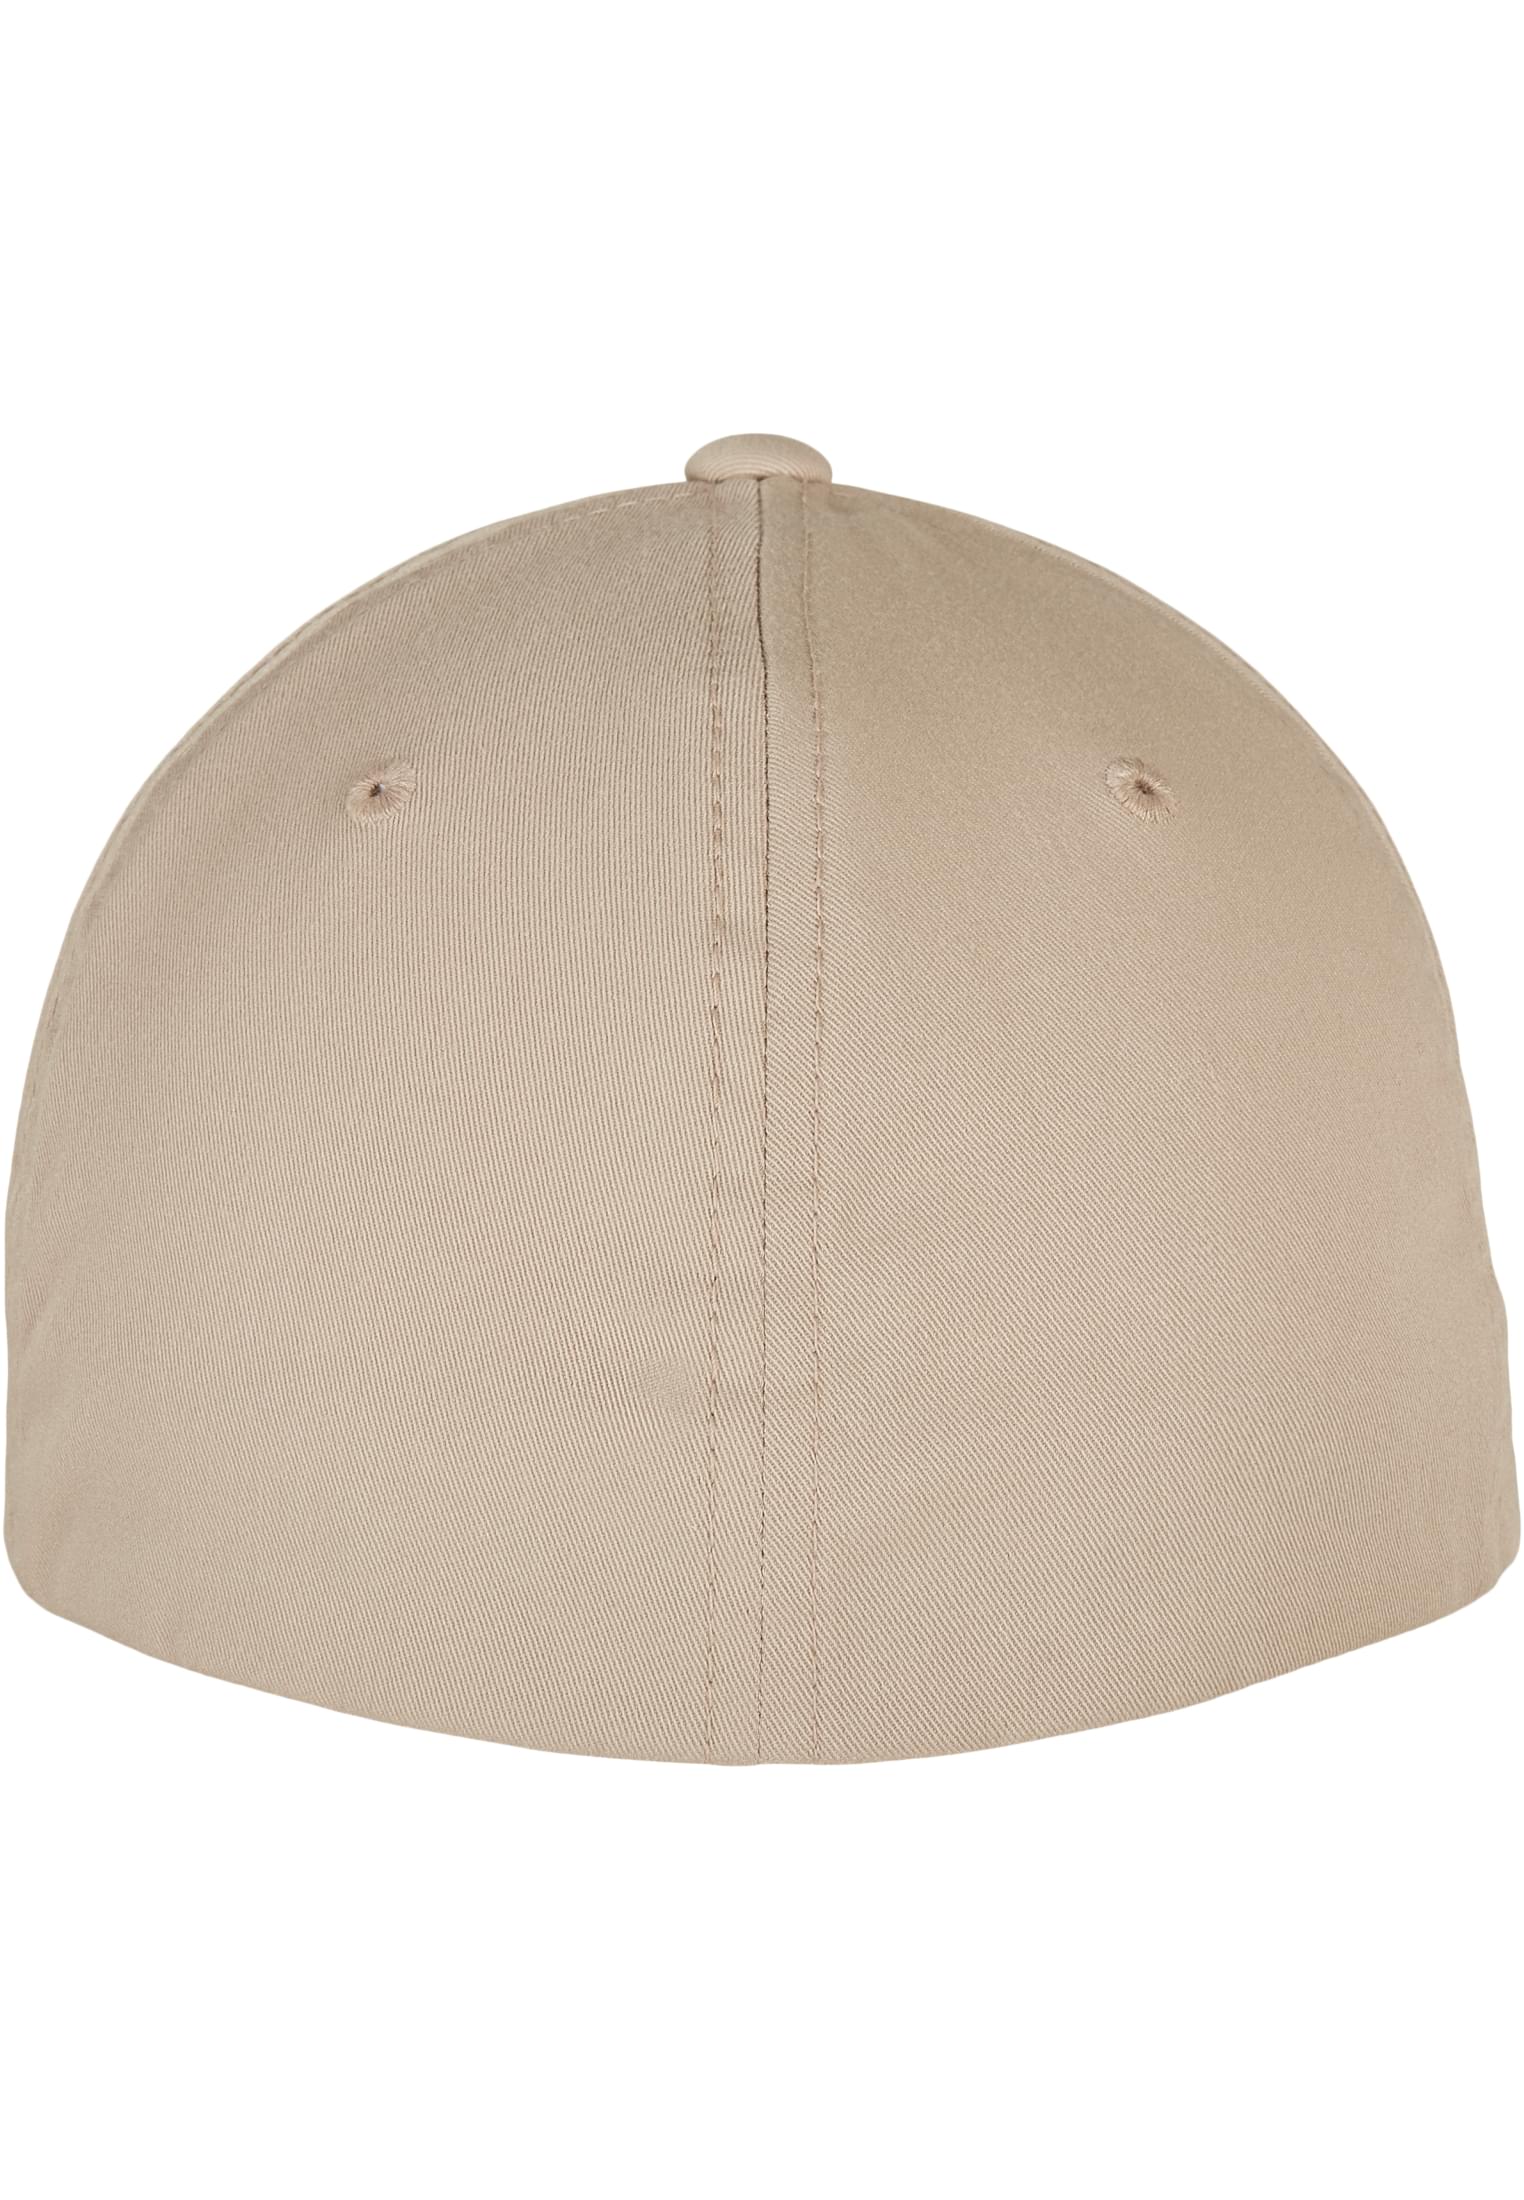 Flexfit Polyester Cap-6277RP Recycled